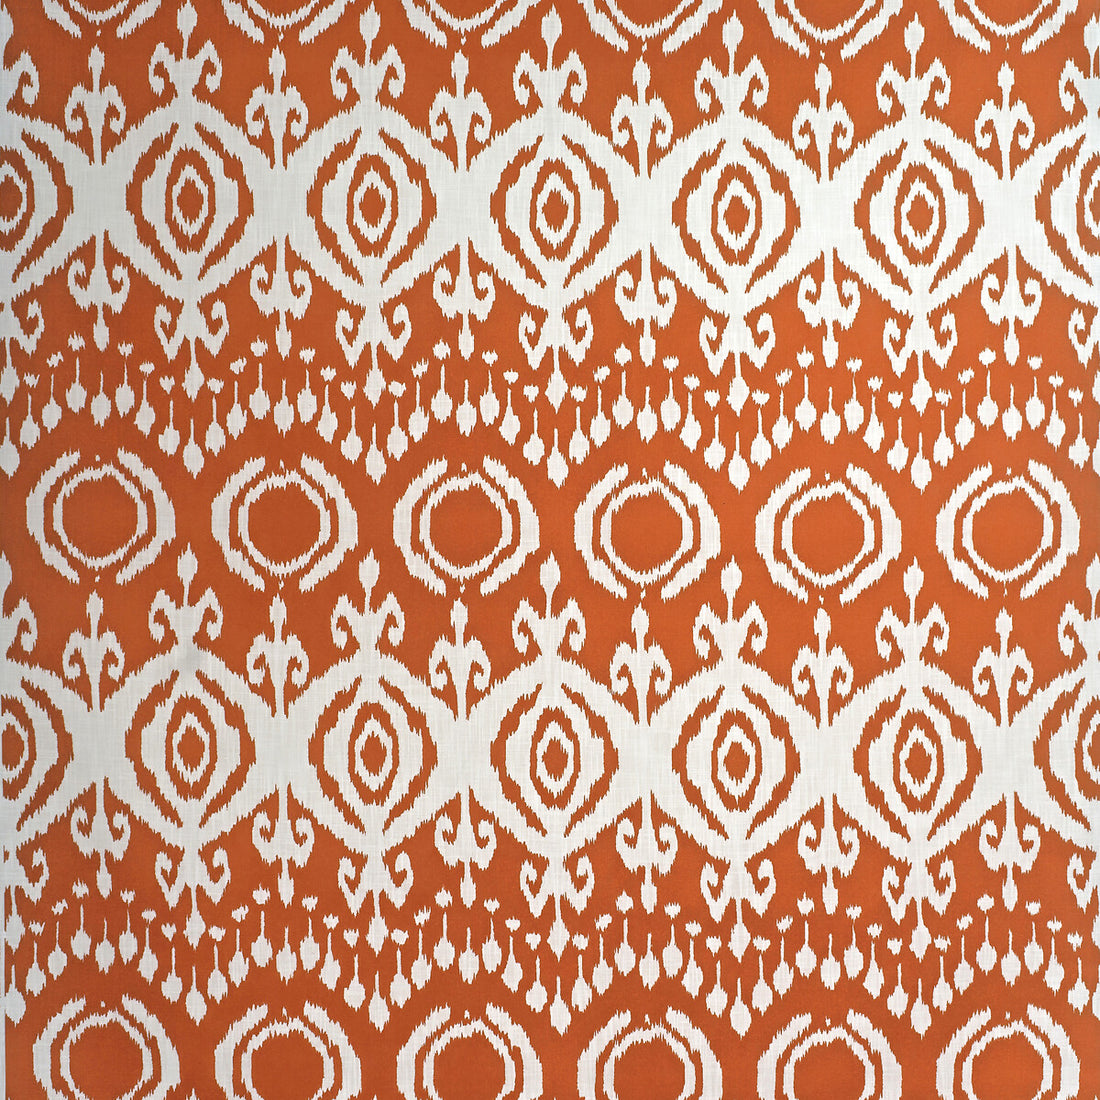 Volcano Outdoor fabric in lava color - pattern AM100352.12.0 - by Kravet Couture in the Andrew Martin The Great Outdoors collection